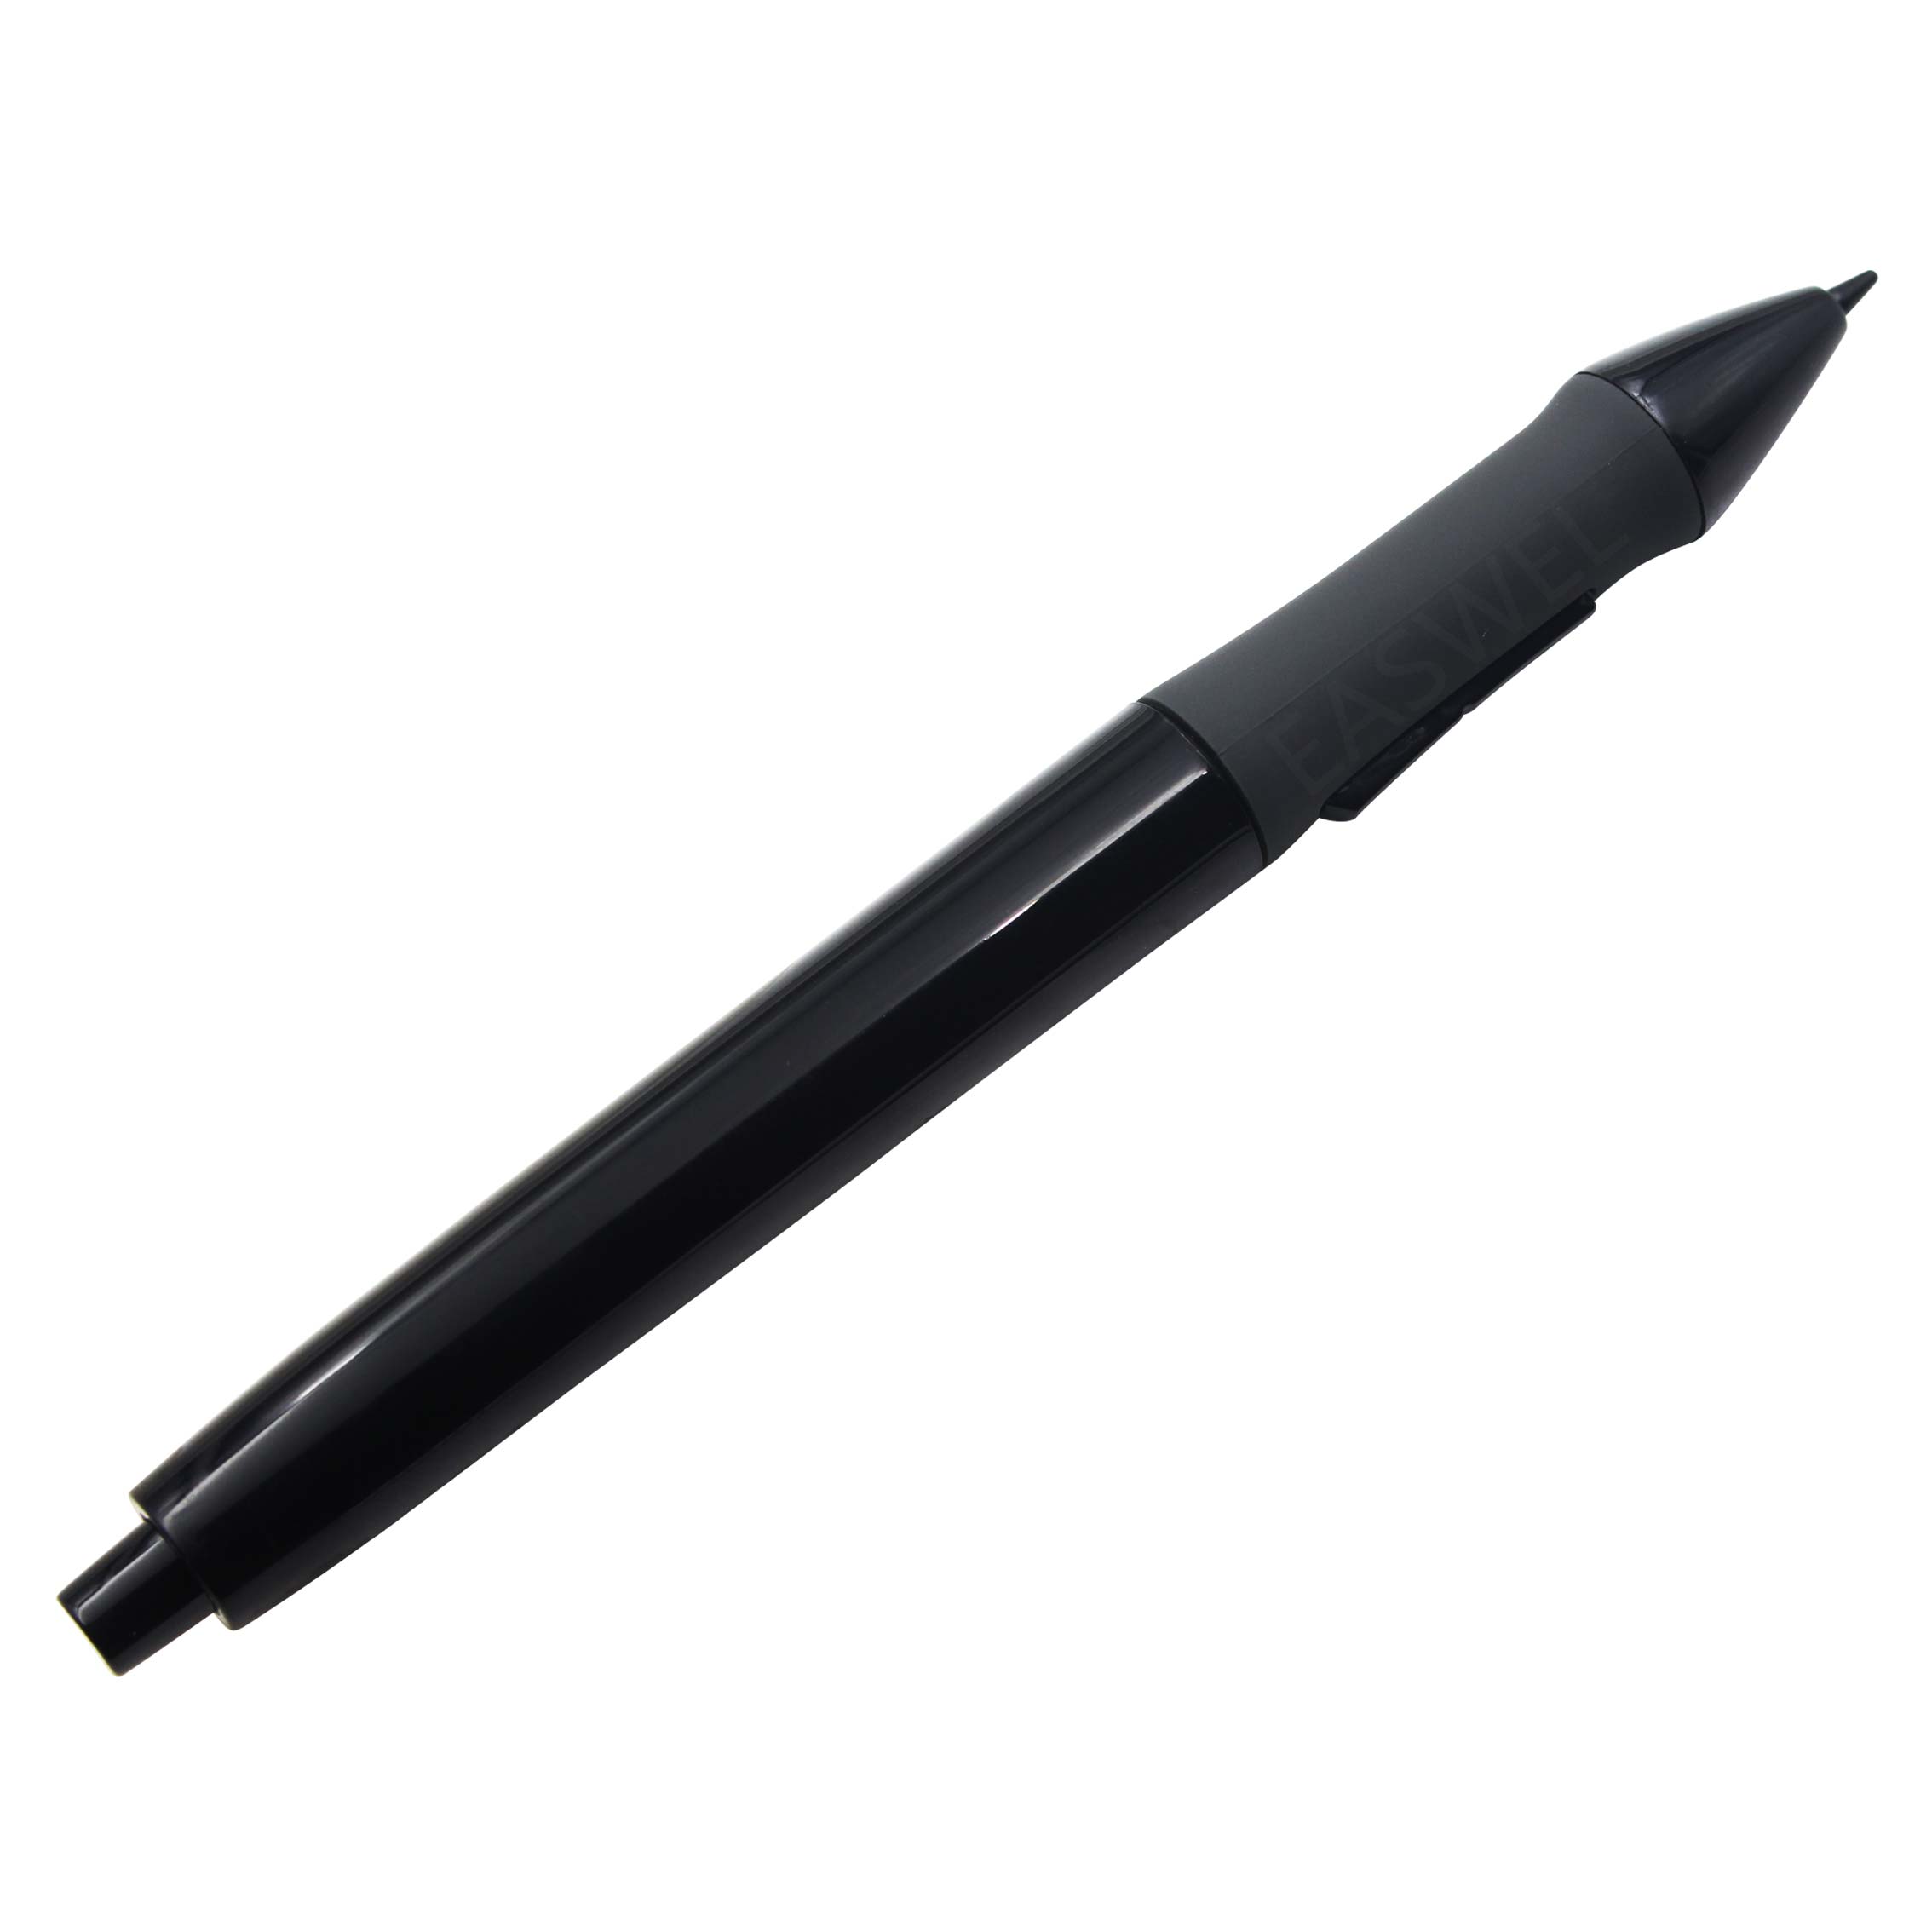 Drawing Digital Stylus Pen For Huion Graphic Tablets 680S H420 580 H610 1060 Pro